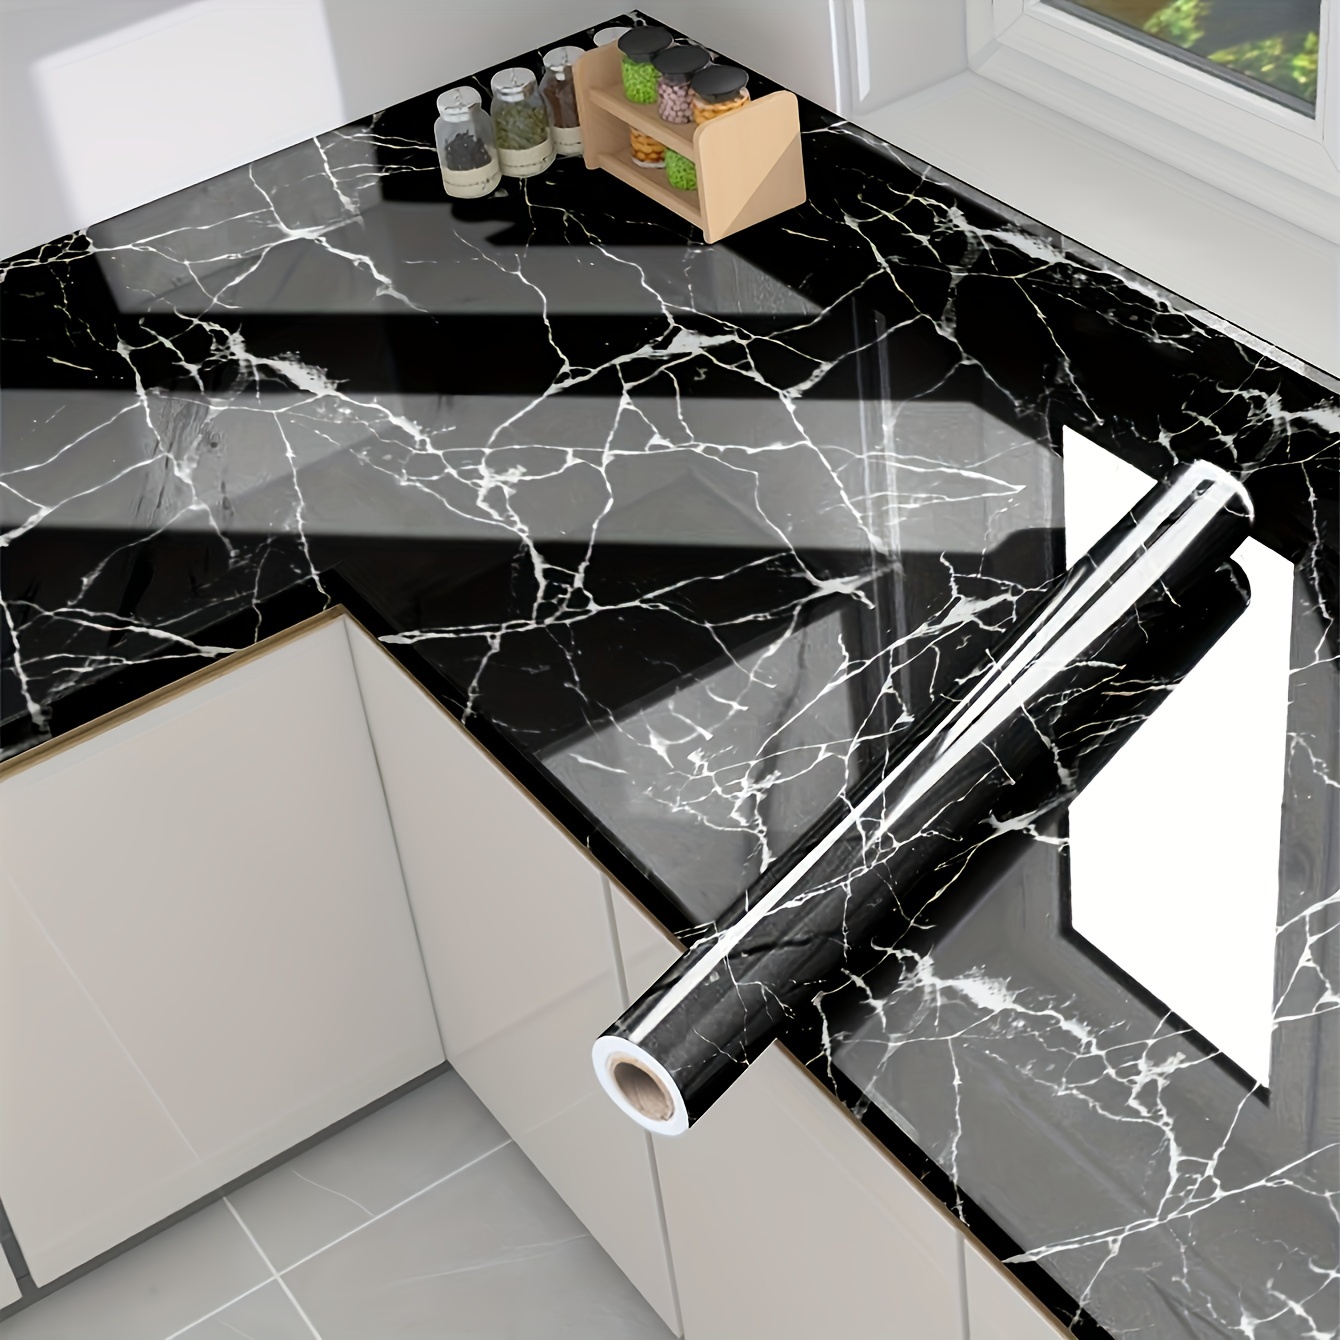 

durable Paper" Waterproof & Oil-resistant Self-adhesive Kitchen Decal - Black Marble Wallpaper For Stove, Countertops, Tiles, Cabinets & Dining Table - Colorful Home Makeover Sticker Roll